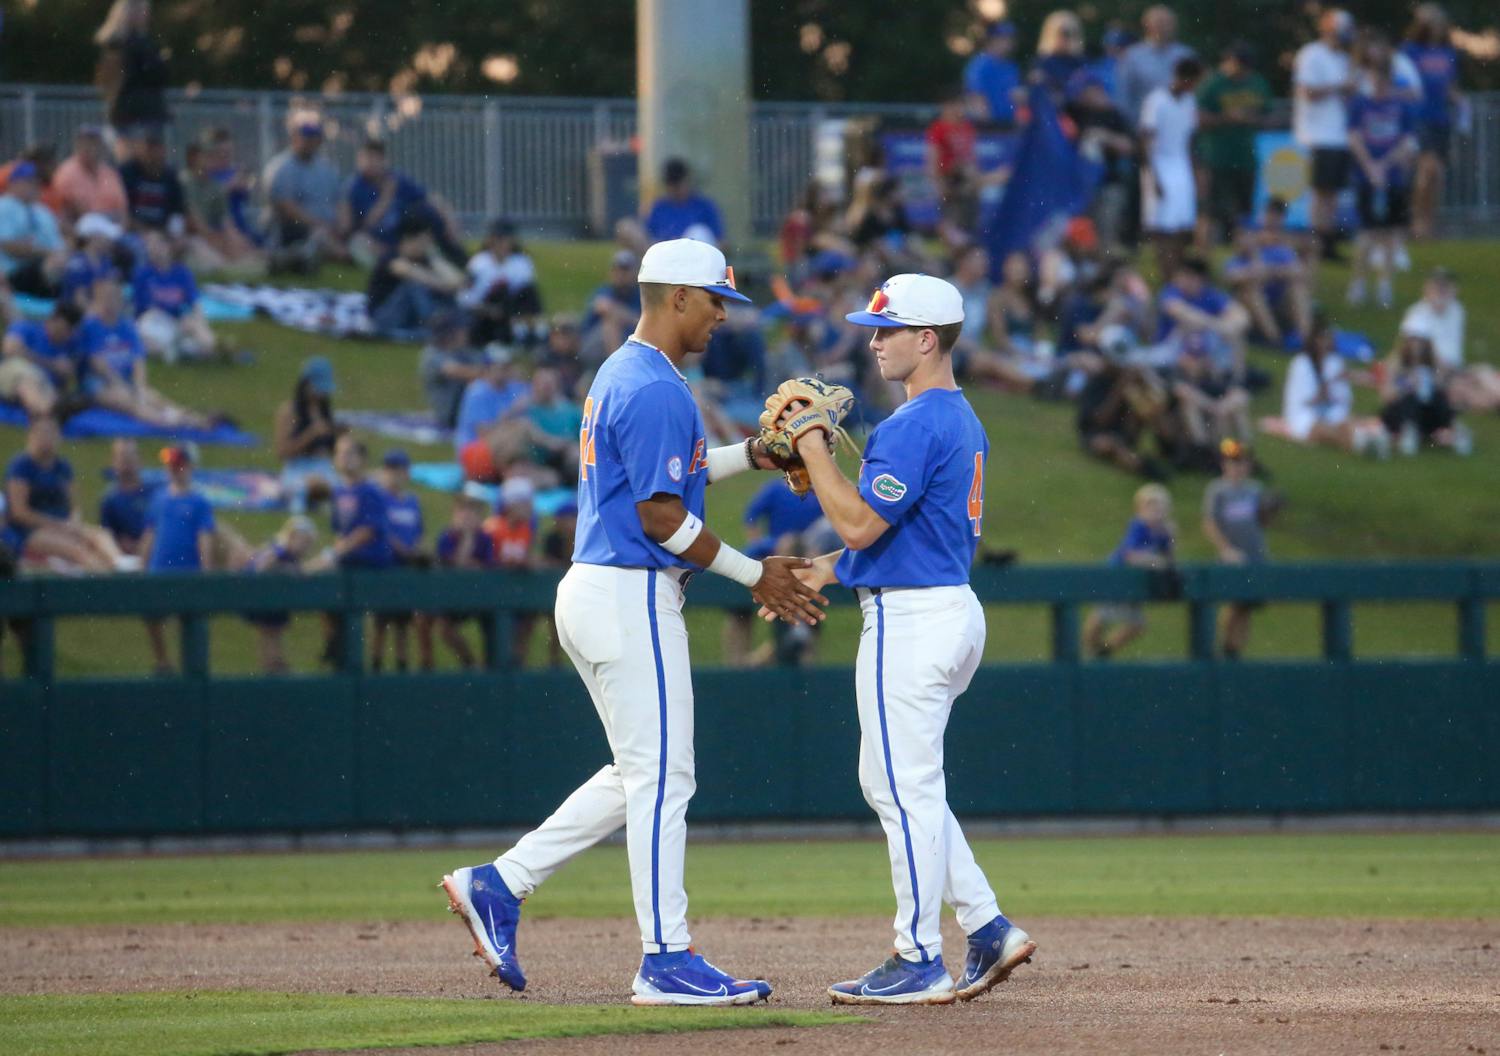 Gators take control of their CWS bracket with a 5-4 win over Oral Roberts